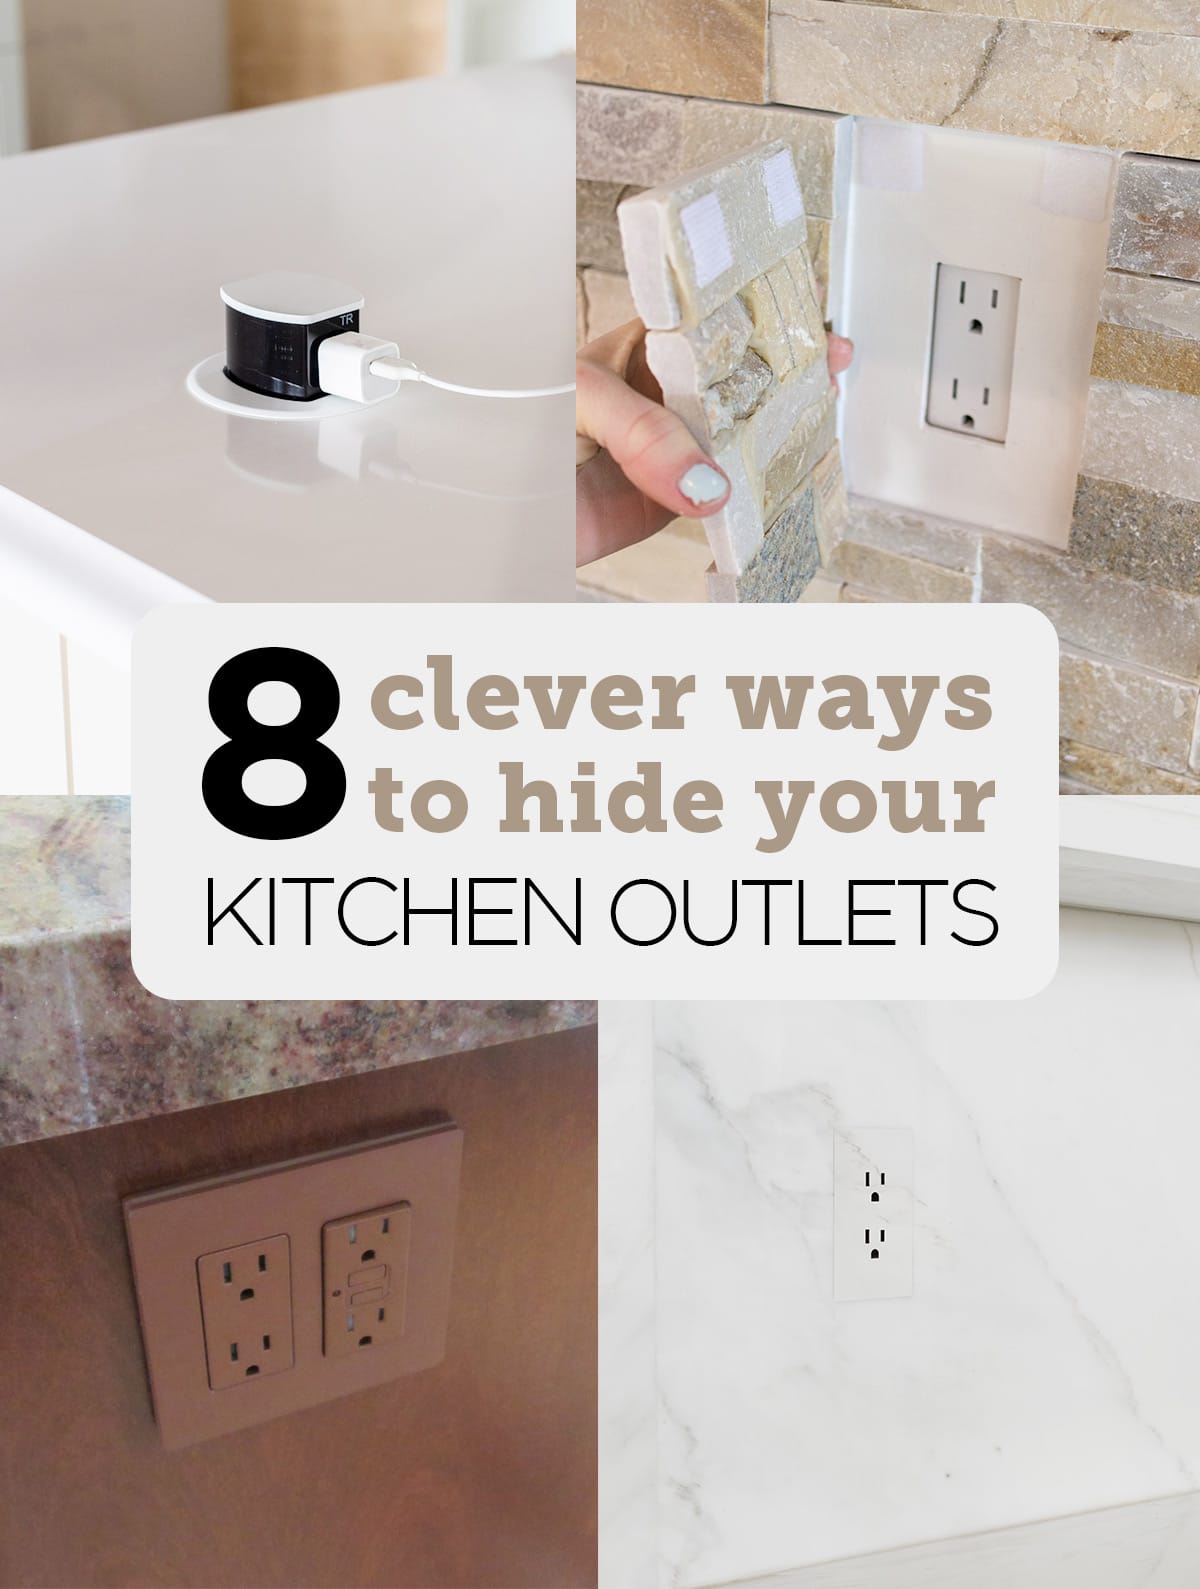 photo grid with 8 clever ways to hide your kitchen outlets text overlay